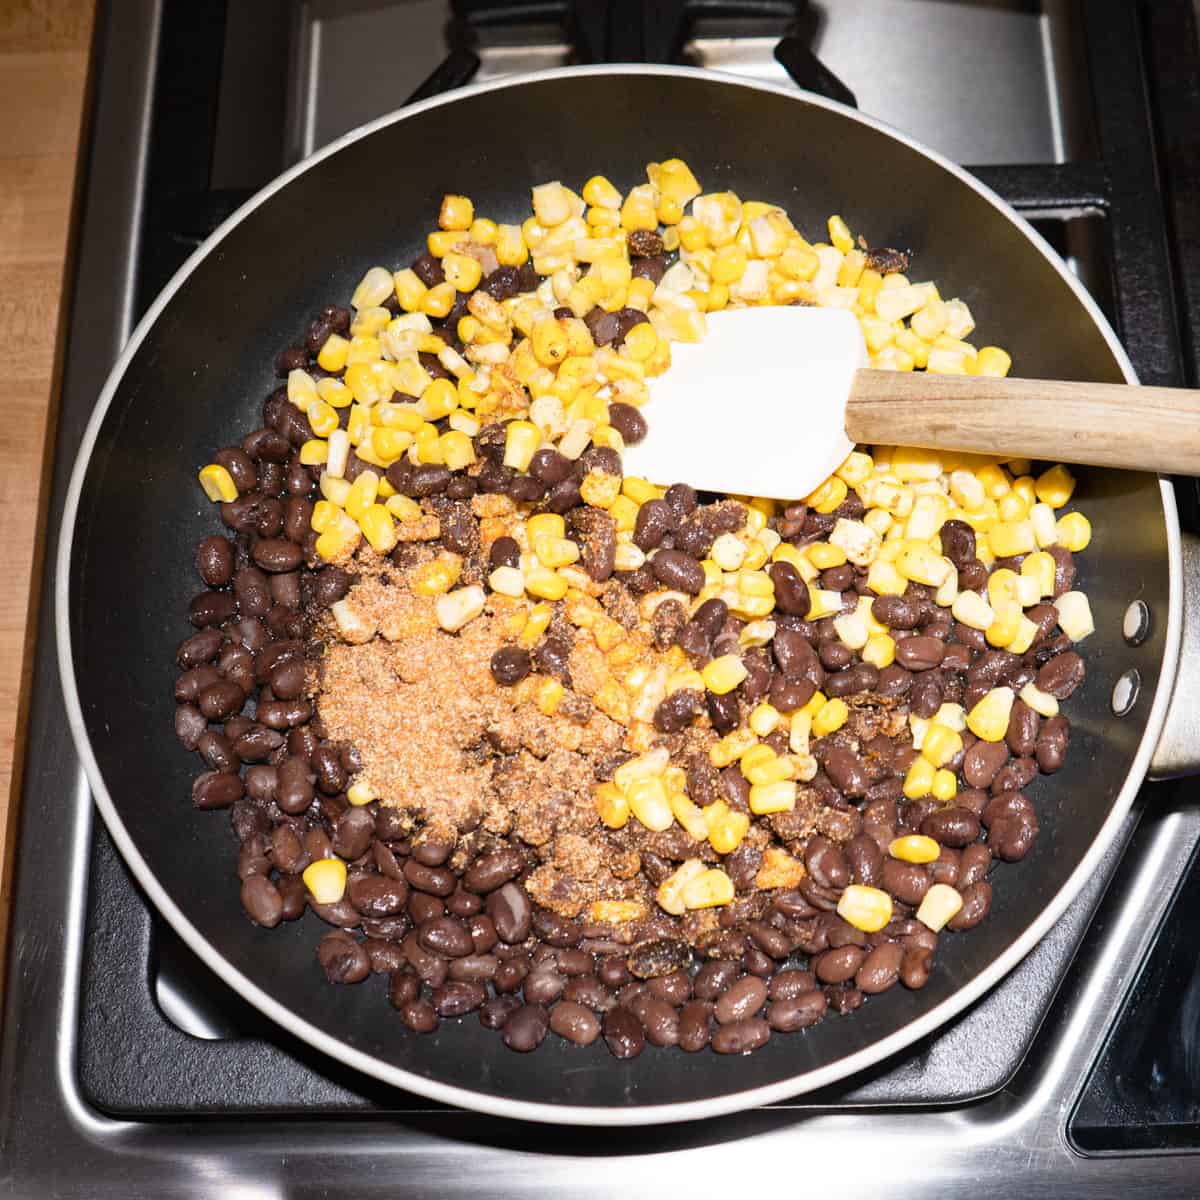 black beans, corn, and spice mix in a frying pan